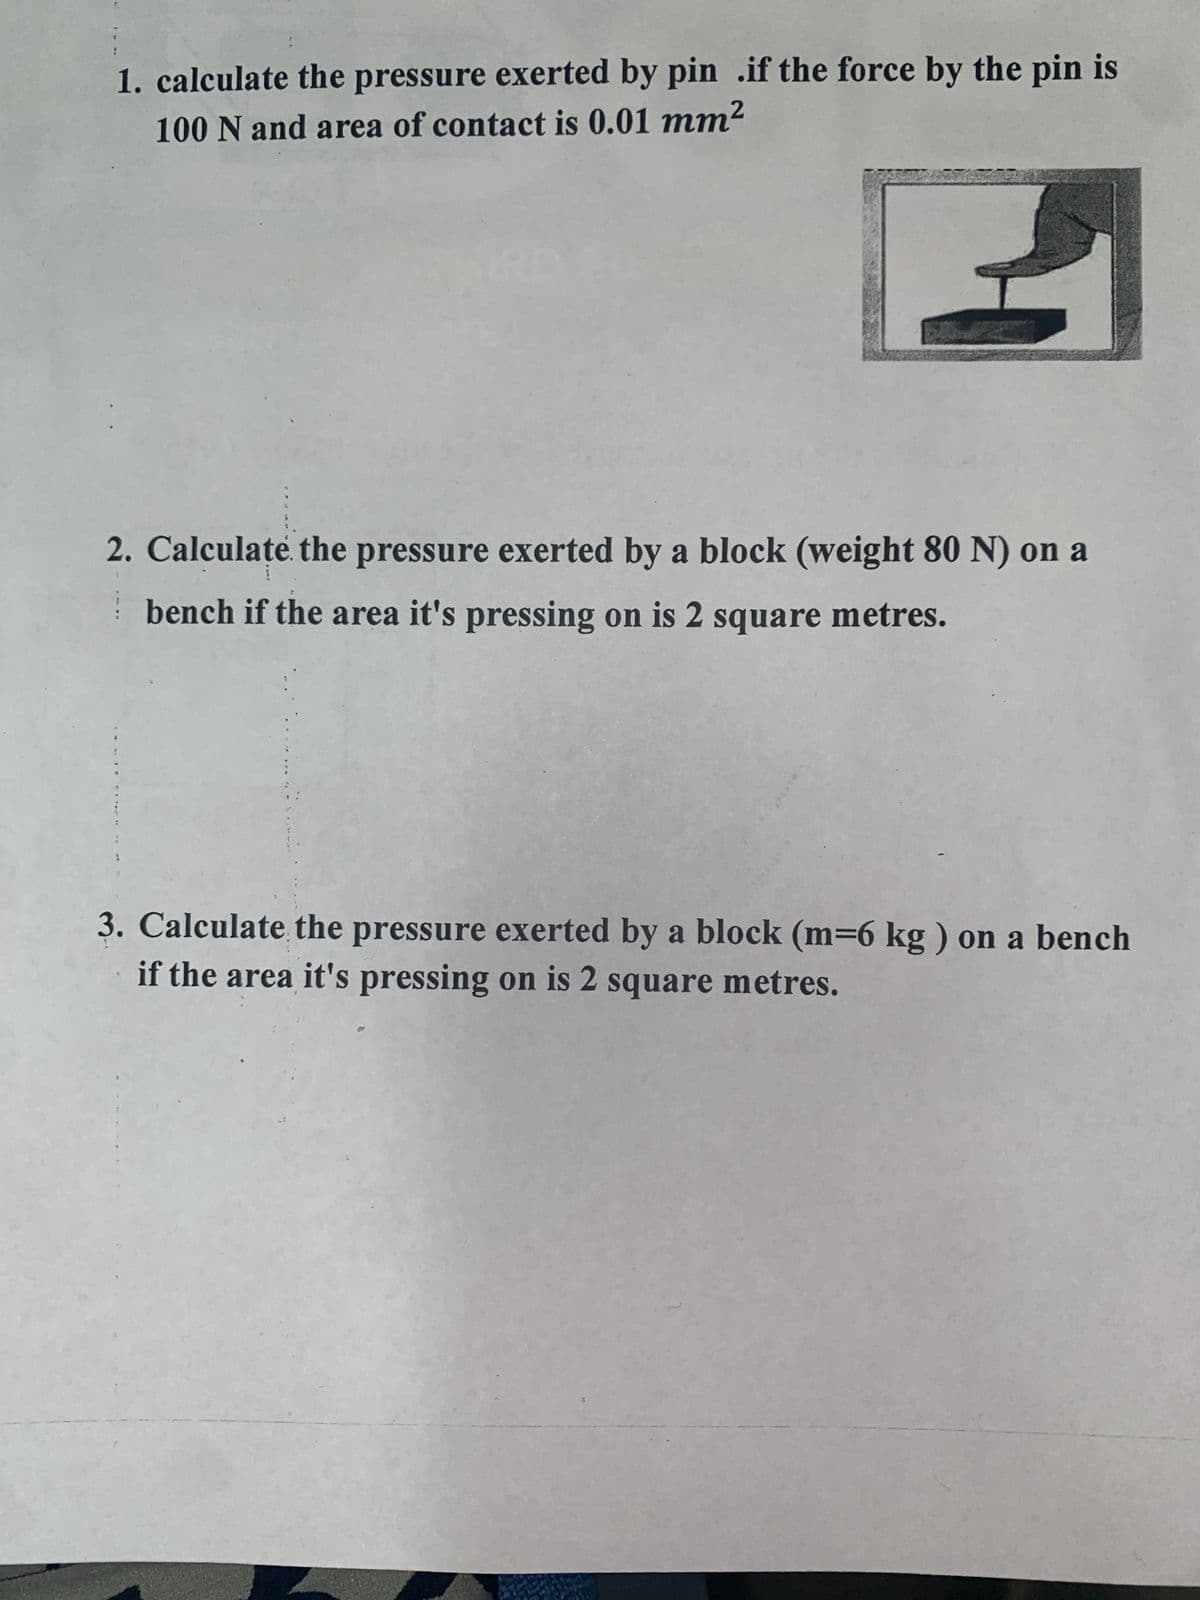 1. calculate the pressure exerted by pin .if the force by the pin is
100 N and area of contact is 0.01 mm²
2. Calculate the pressure exerted by a block (weight 80 N) on a
bench if the area it's pressing on is 2 square metres.
3. Calculate the pressure exerted by a block (m=6 kg) on a bench
if the area it's pressing on is 2 square metres.